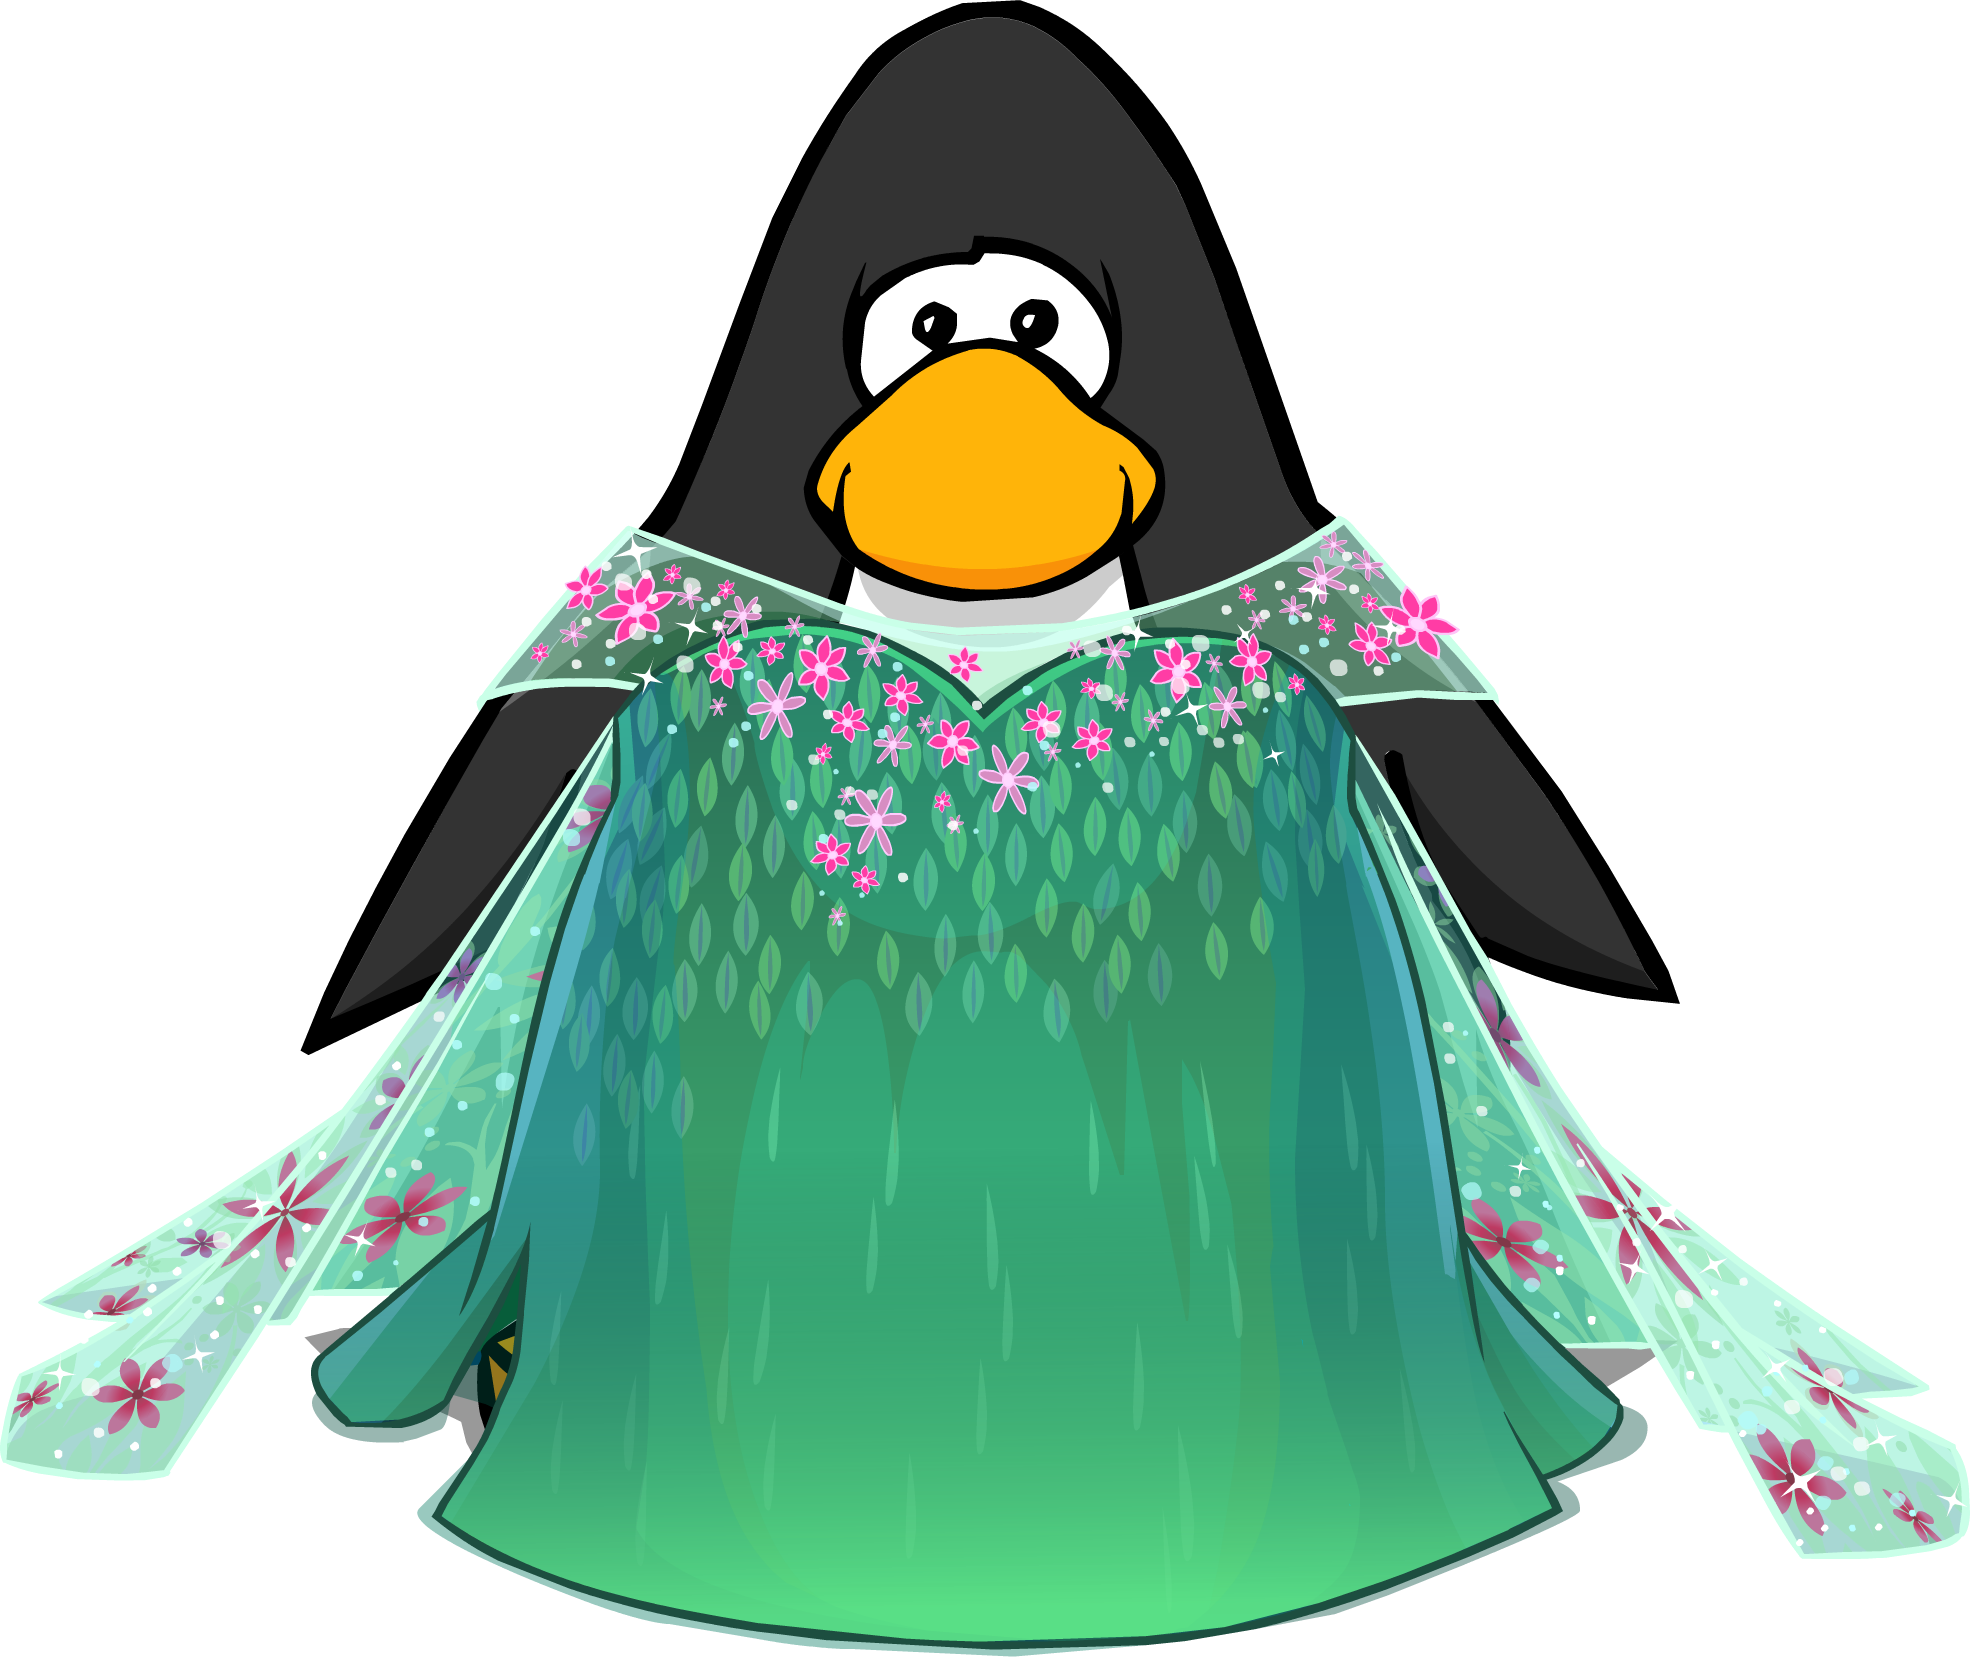 Elsa's Spring Dress On A Player Card - Penguin In A Dress (1970x1657)